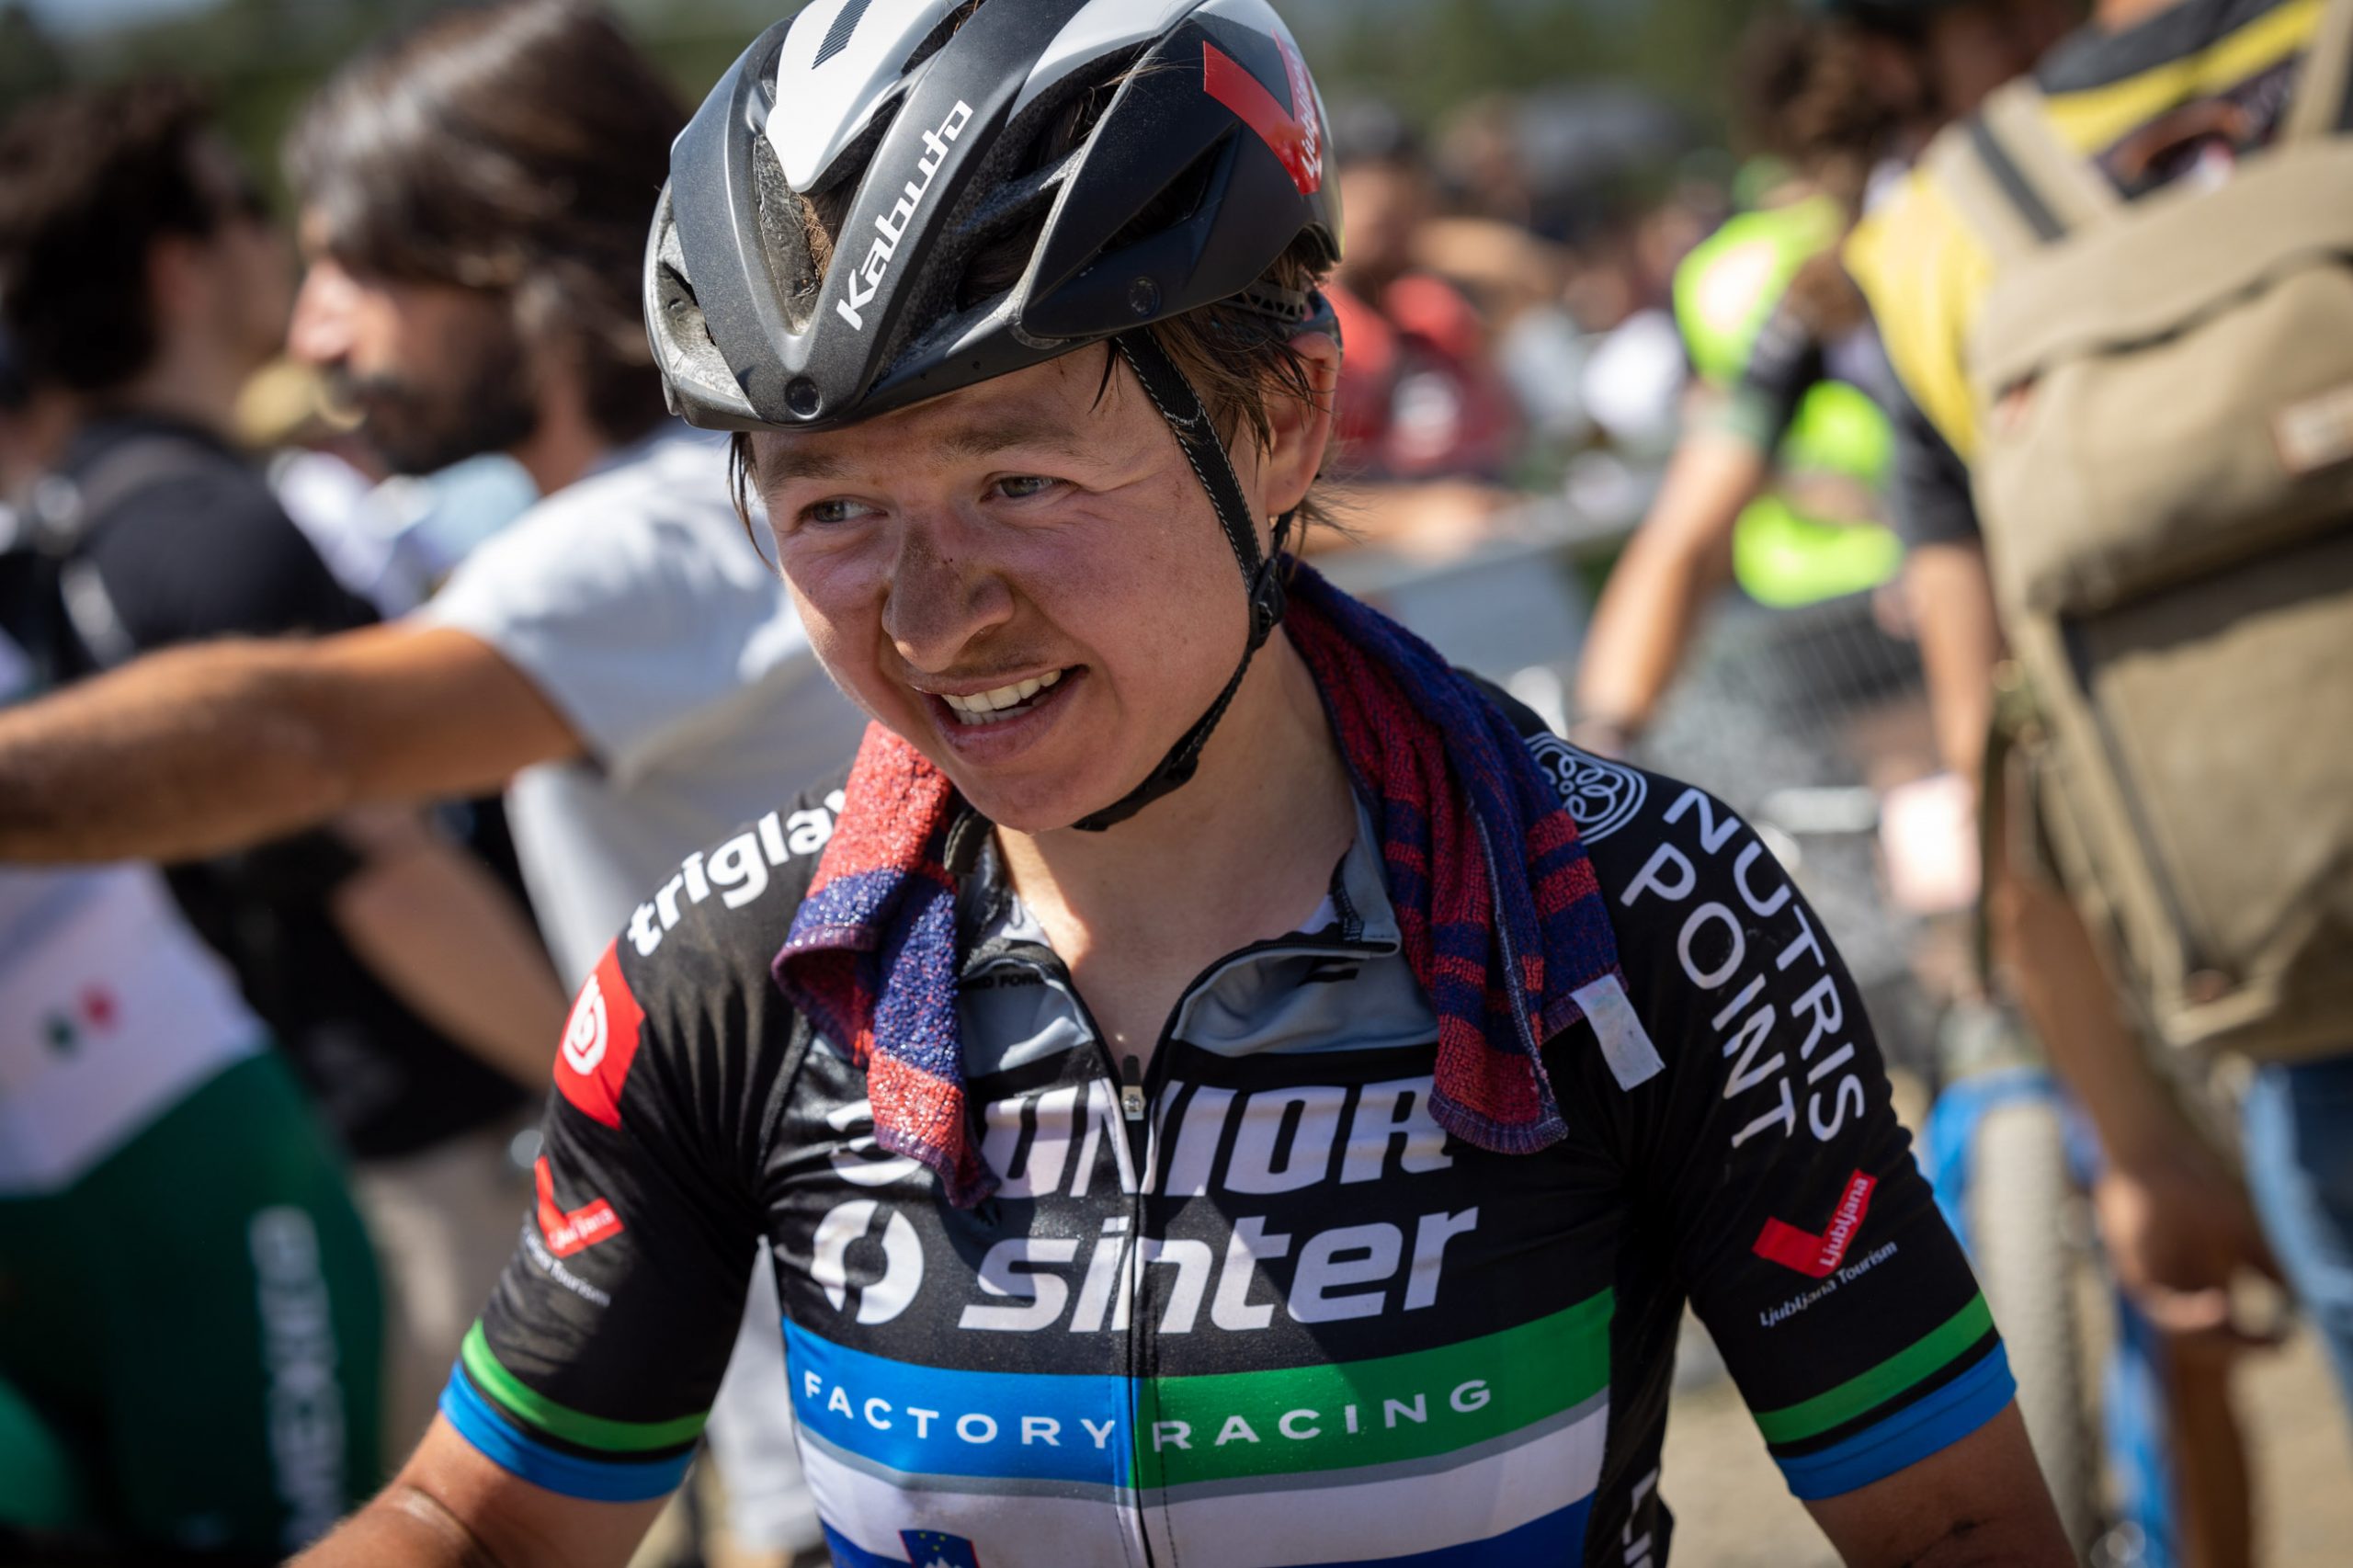 Tanja takes 16th place in Andorra